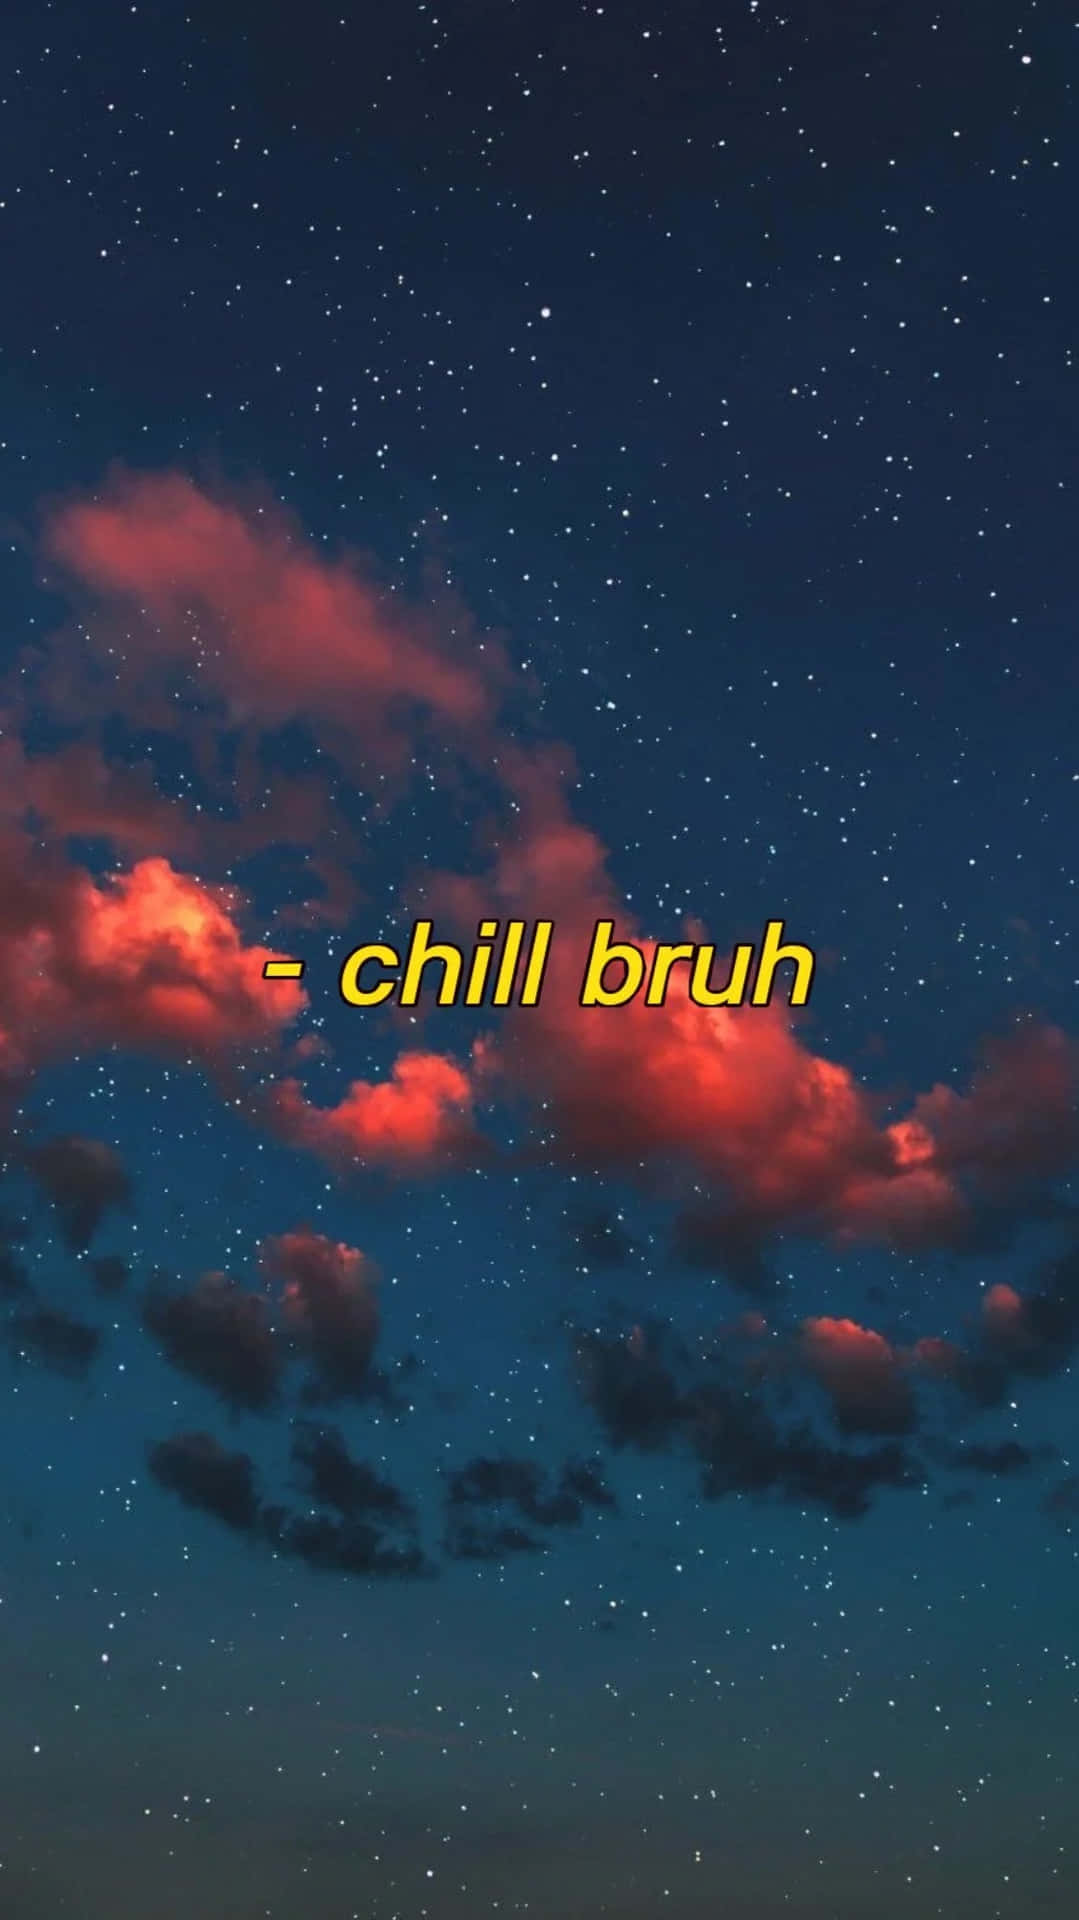 Starry Night Sky Chill Bruh Background